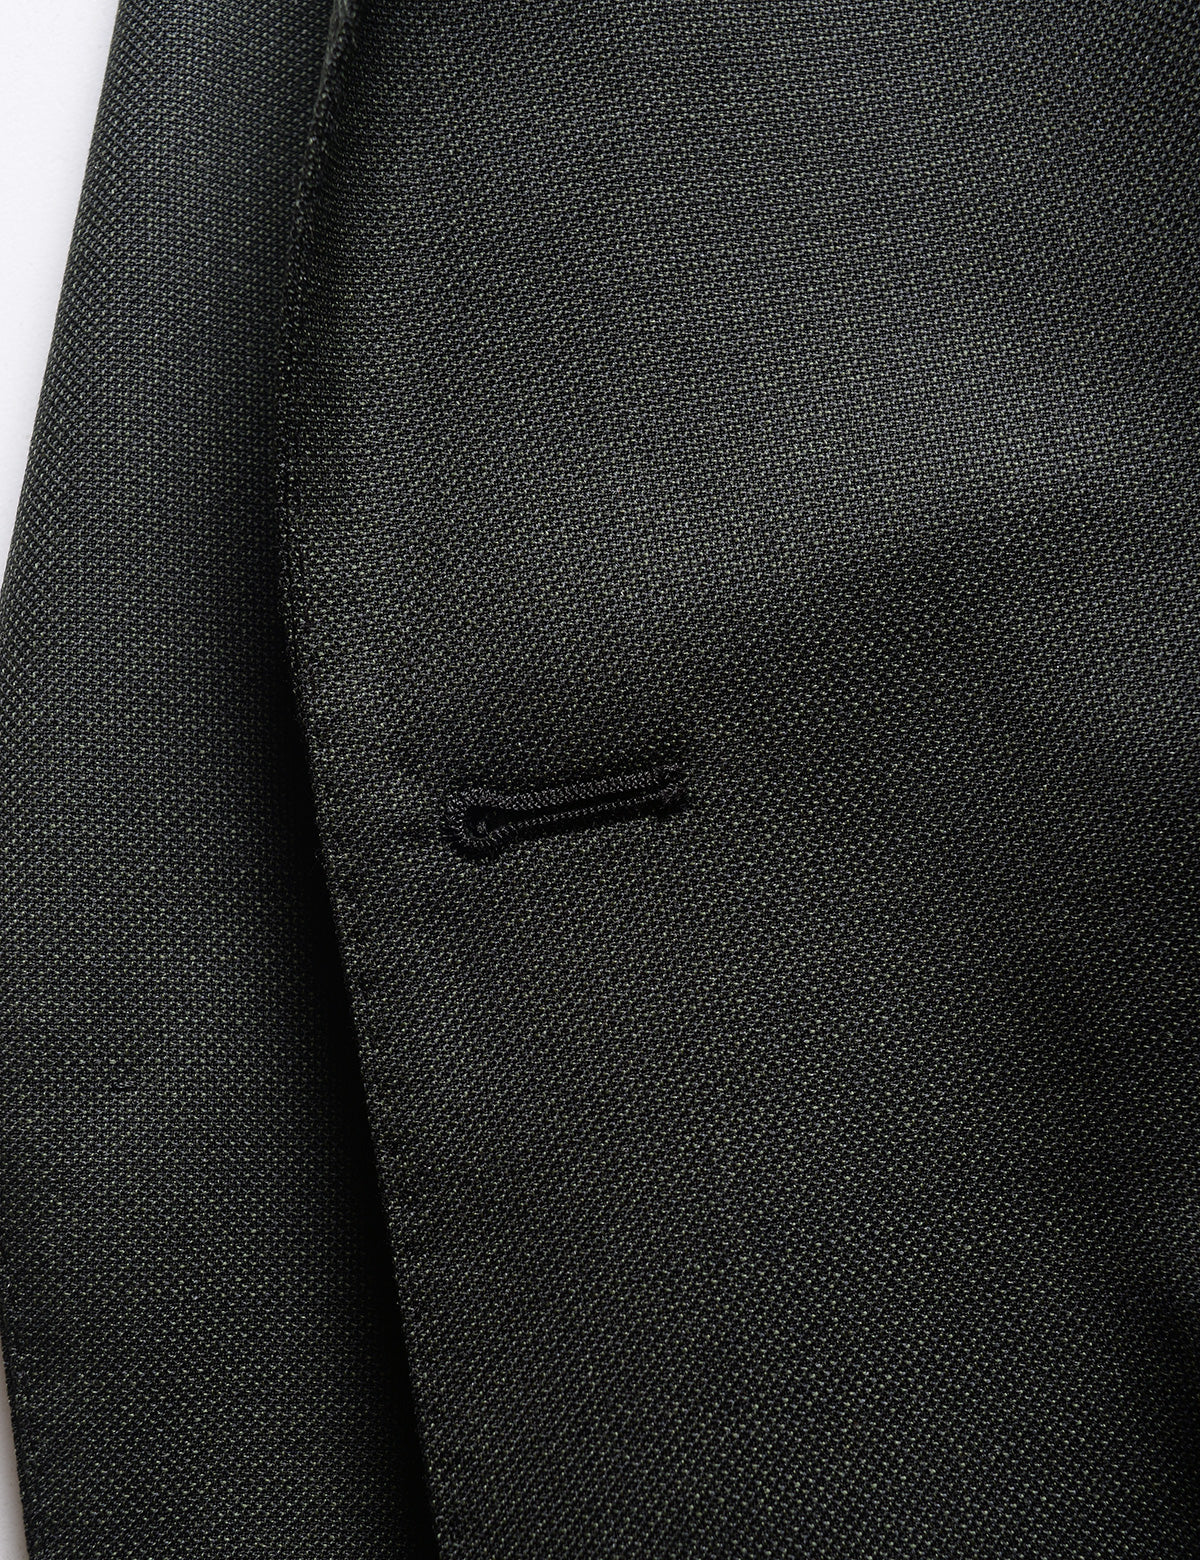 BKT50 Tailored Jacket in Textured Wool - Wrought Iron